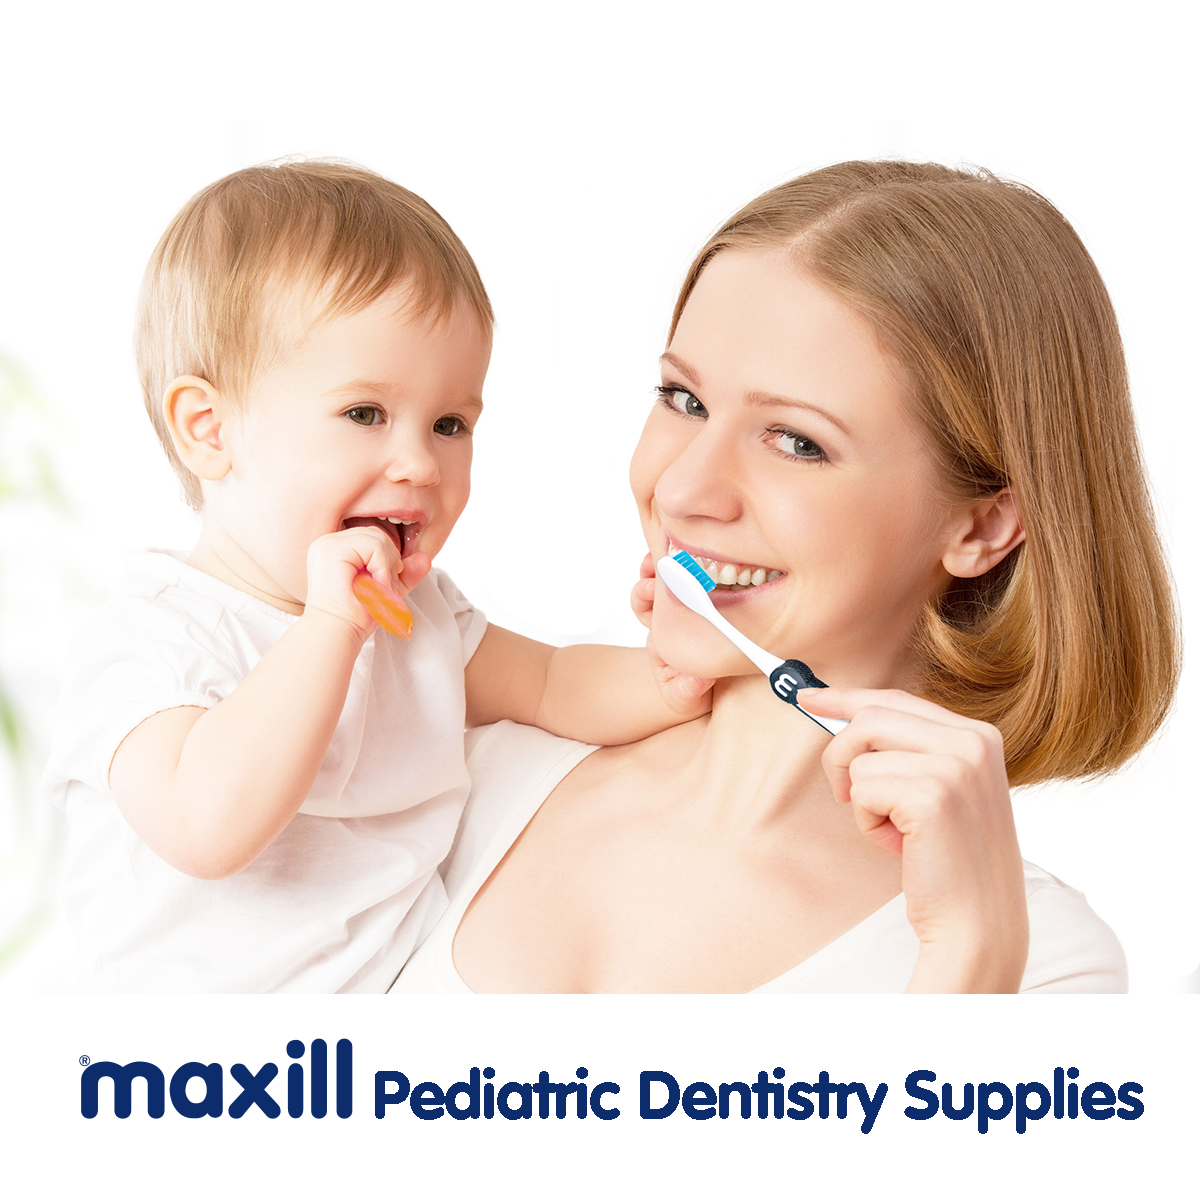 Children’s Dental Practice: Dental Supplies And Things To Consider 